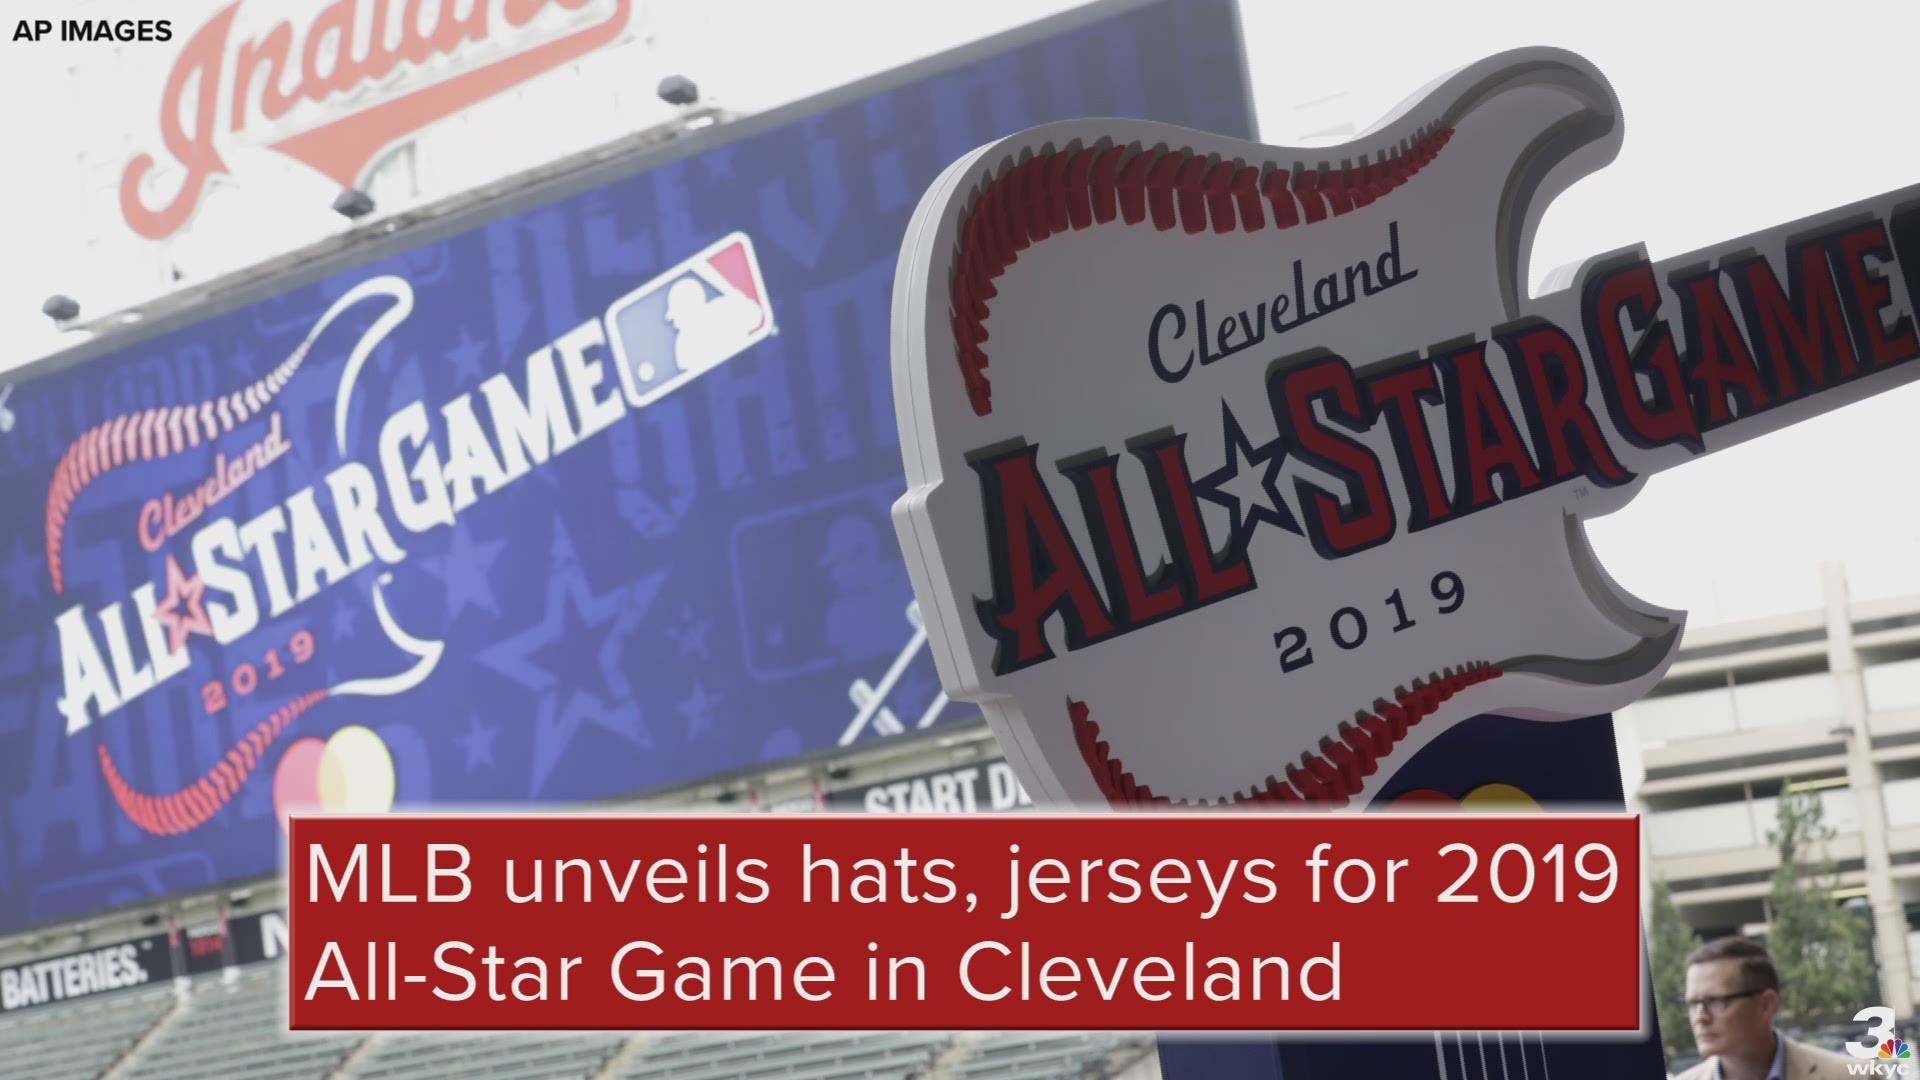 PHOTOS: Home Run Derby & 2019 MLB All-Star Game Caps And Jerseys